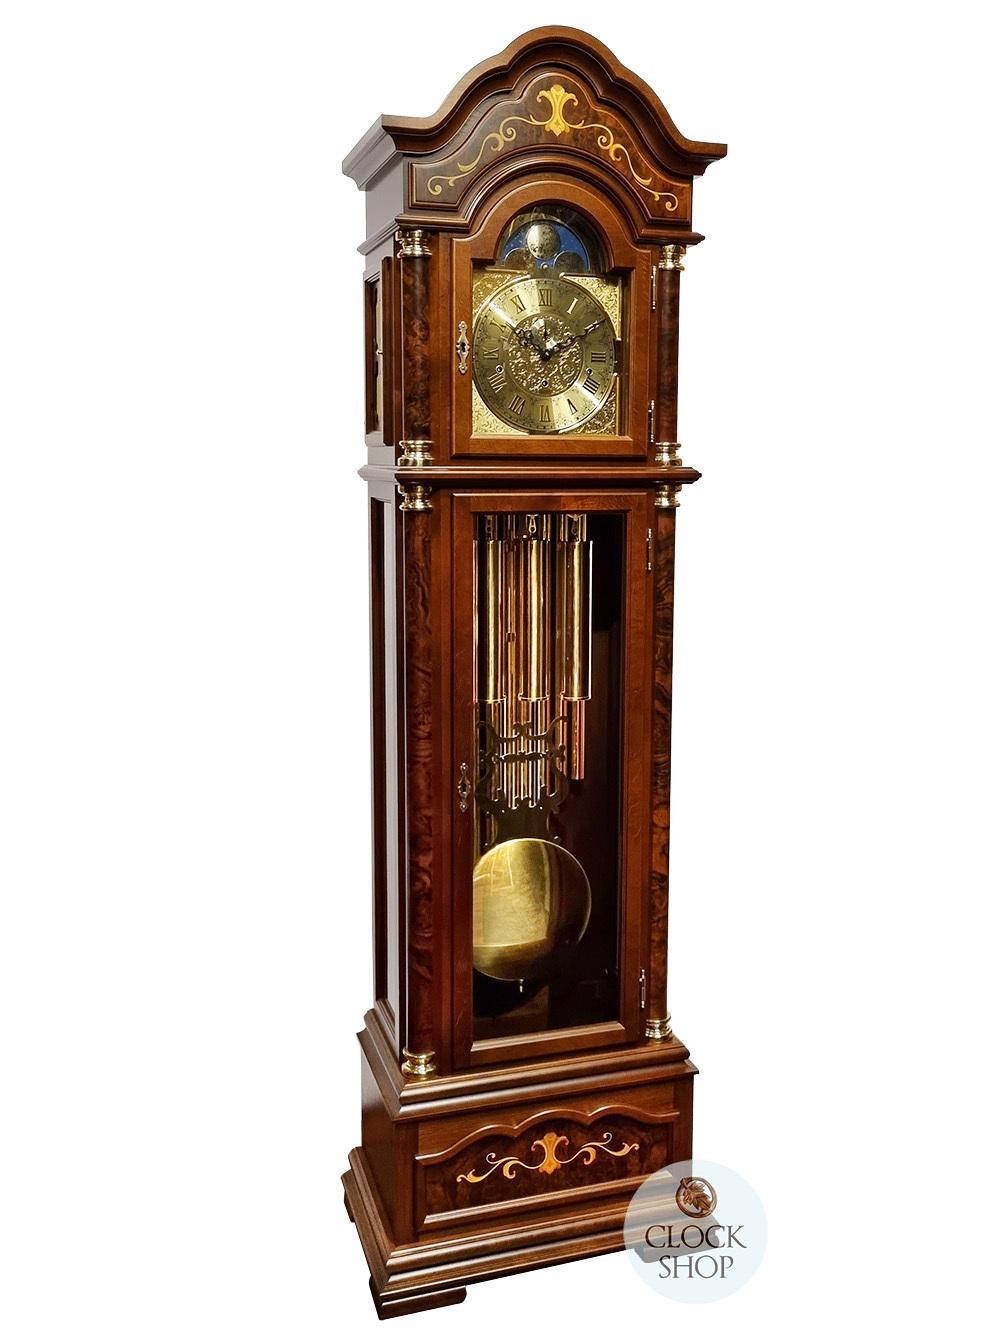 206cm Walnut Grandfather Clock With Tubular Bells, Triple Chime & Wood Inlay By HERMLE